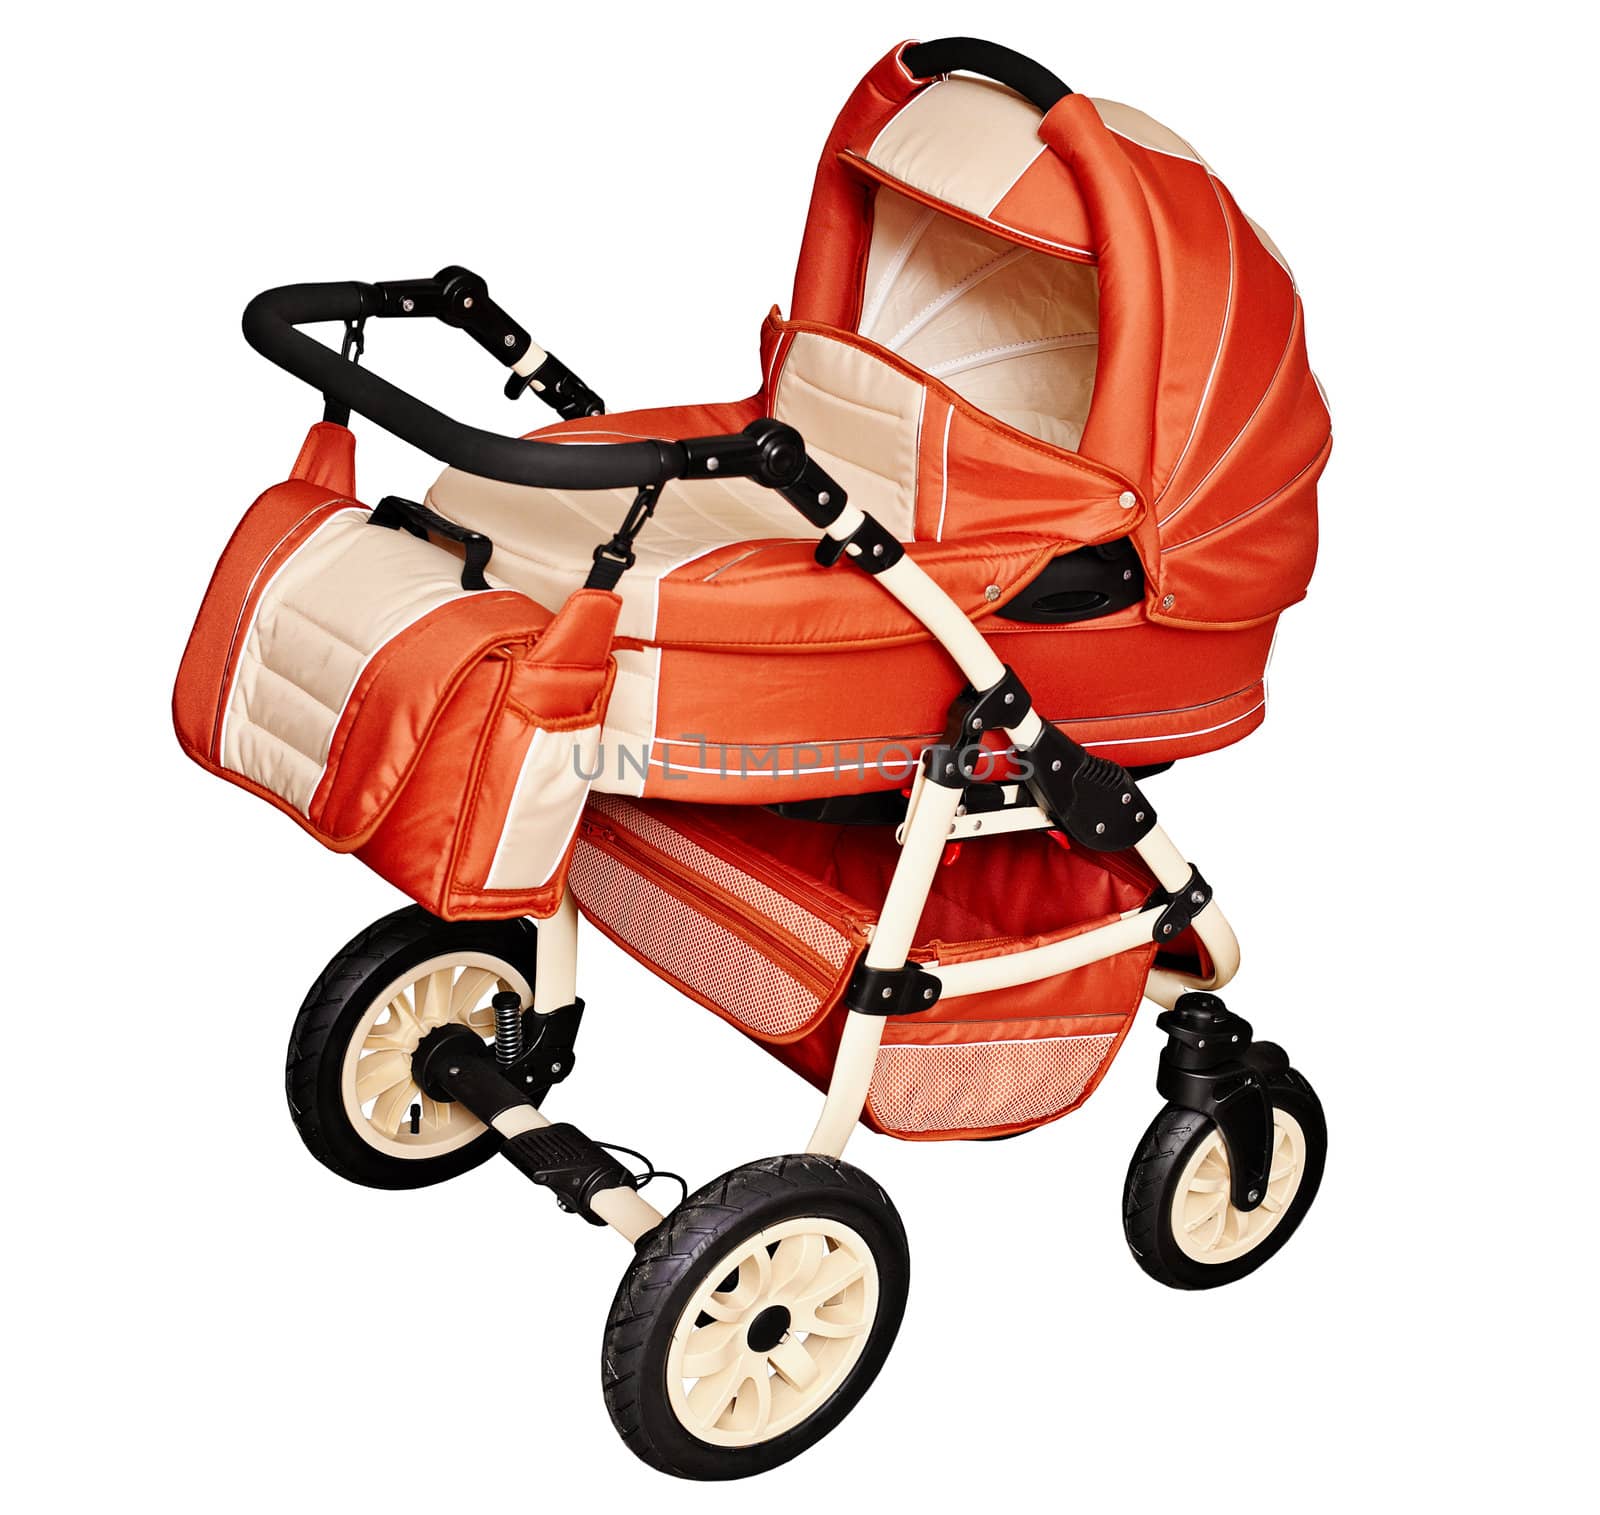 Pushchair for transporting children in winter by pzaxe